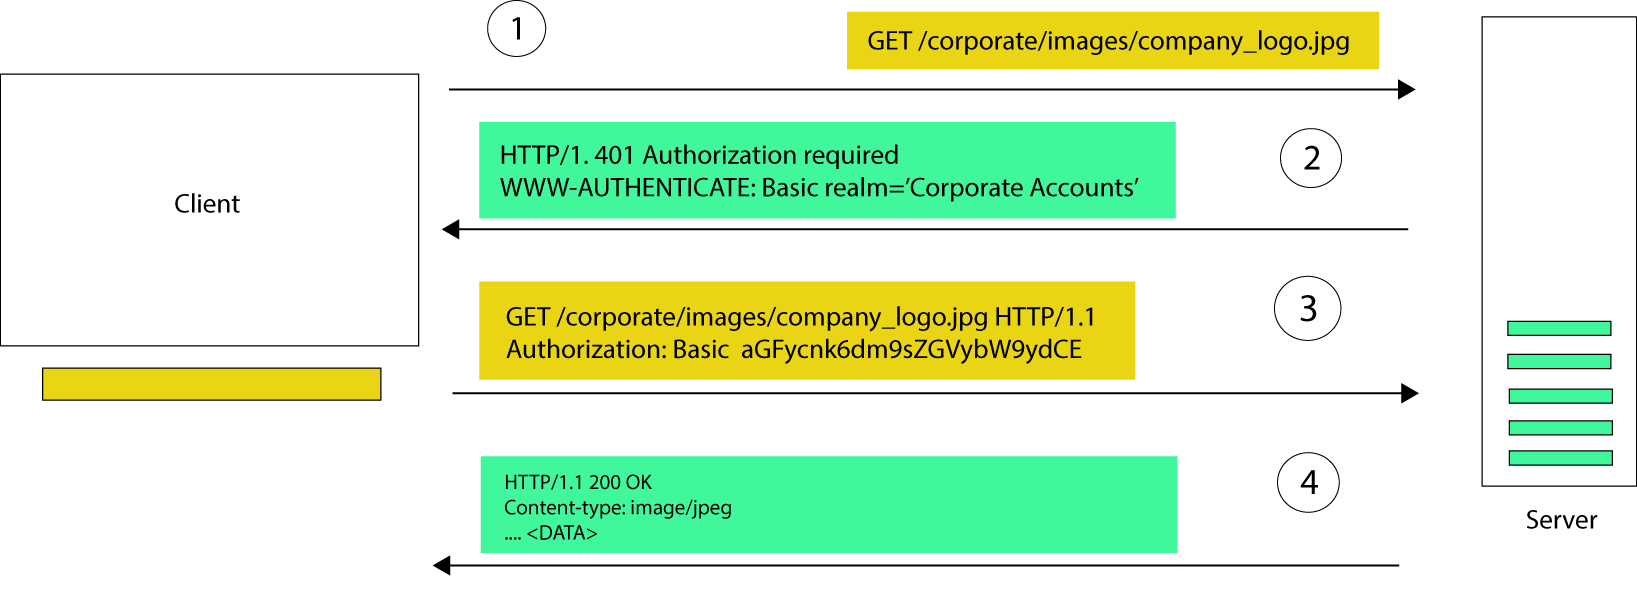 A simplified model of basic auth